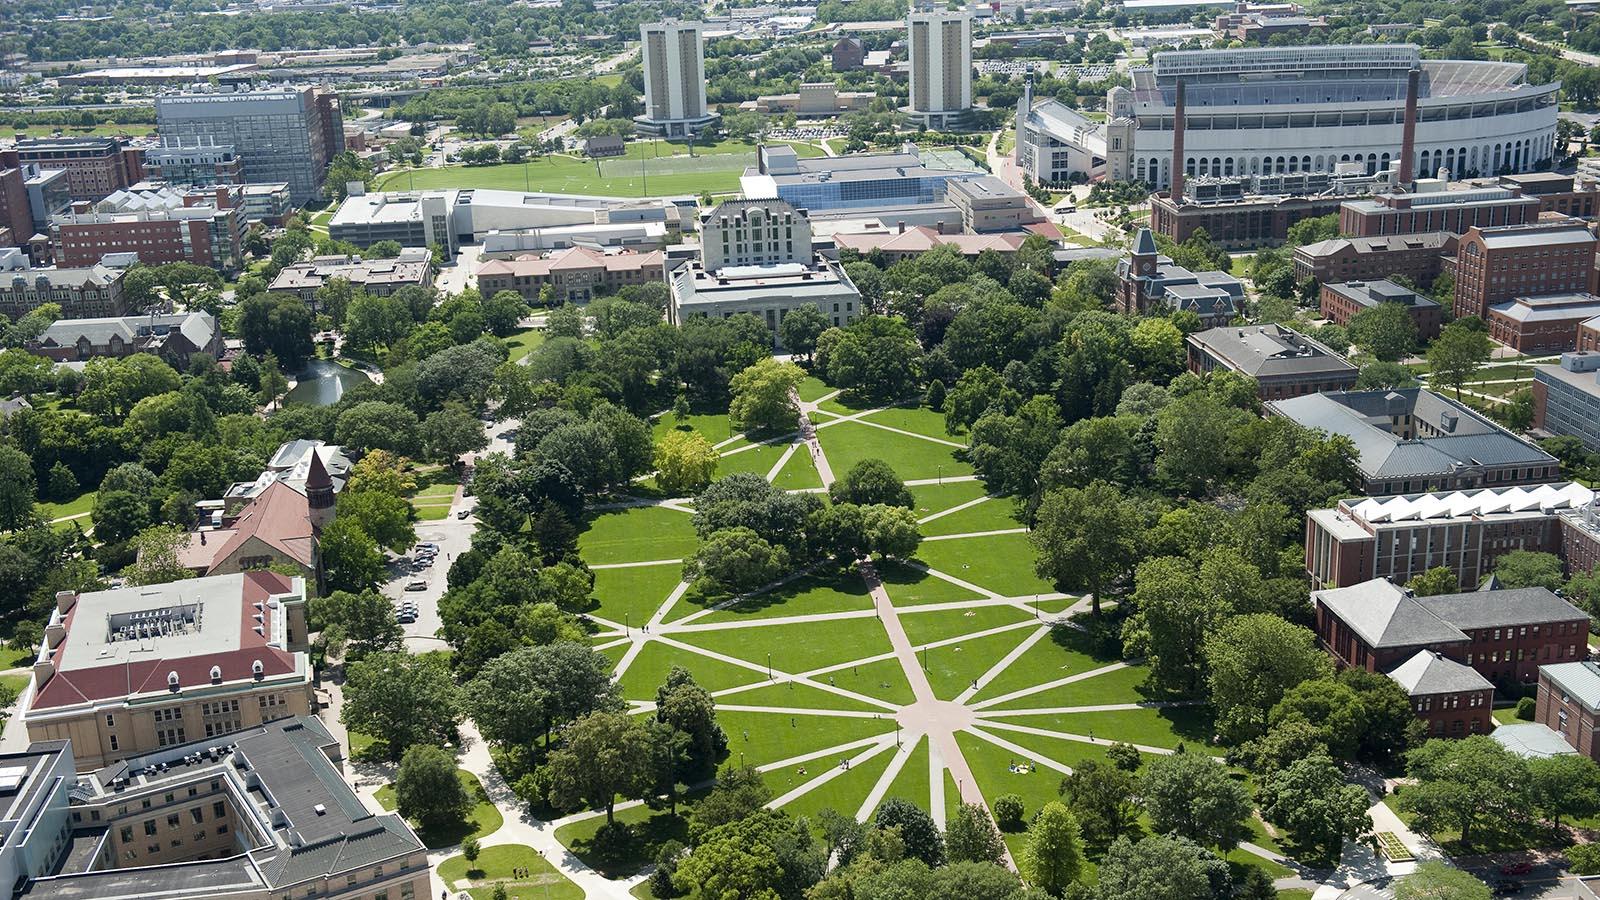 Aerial view of Ohio State Oval